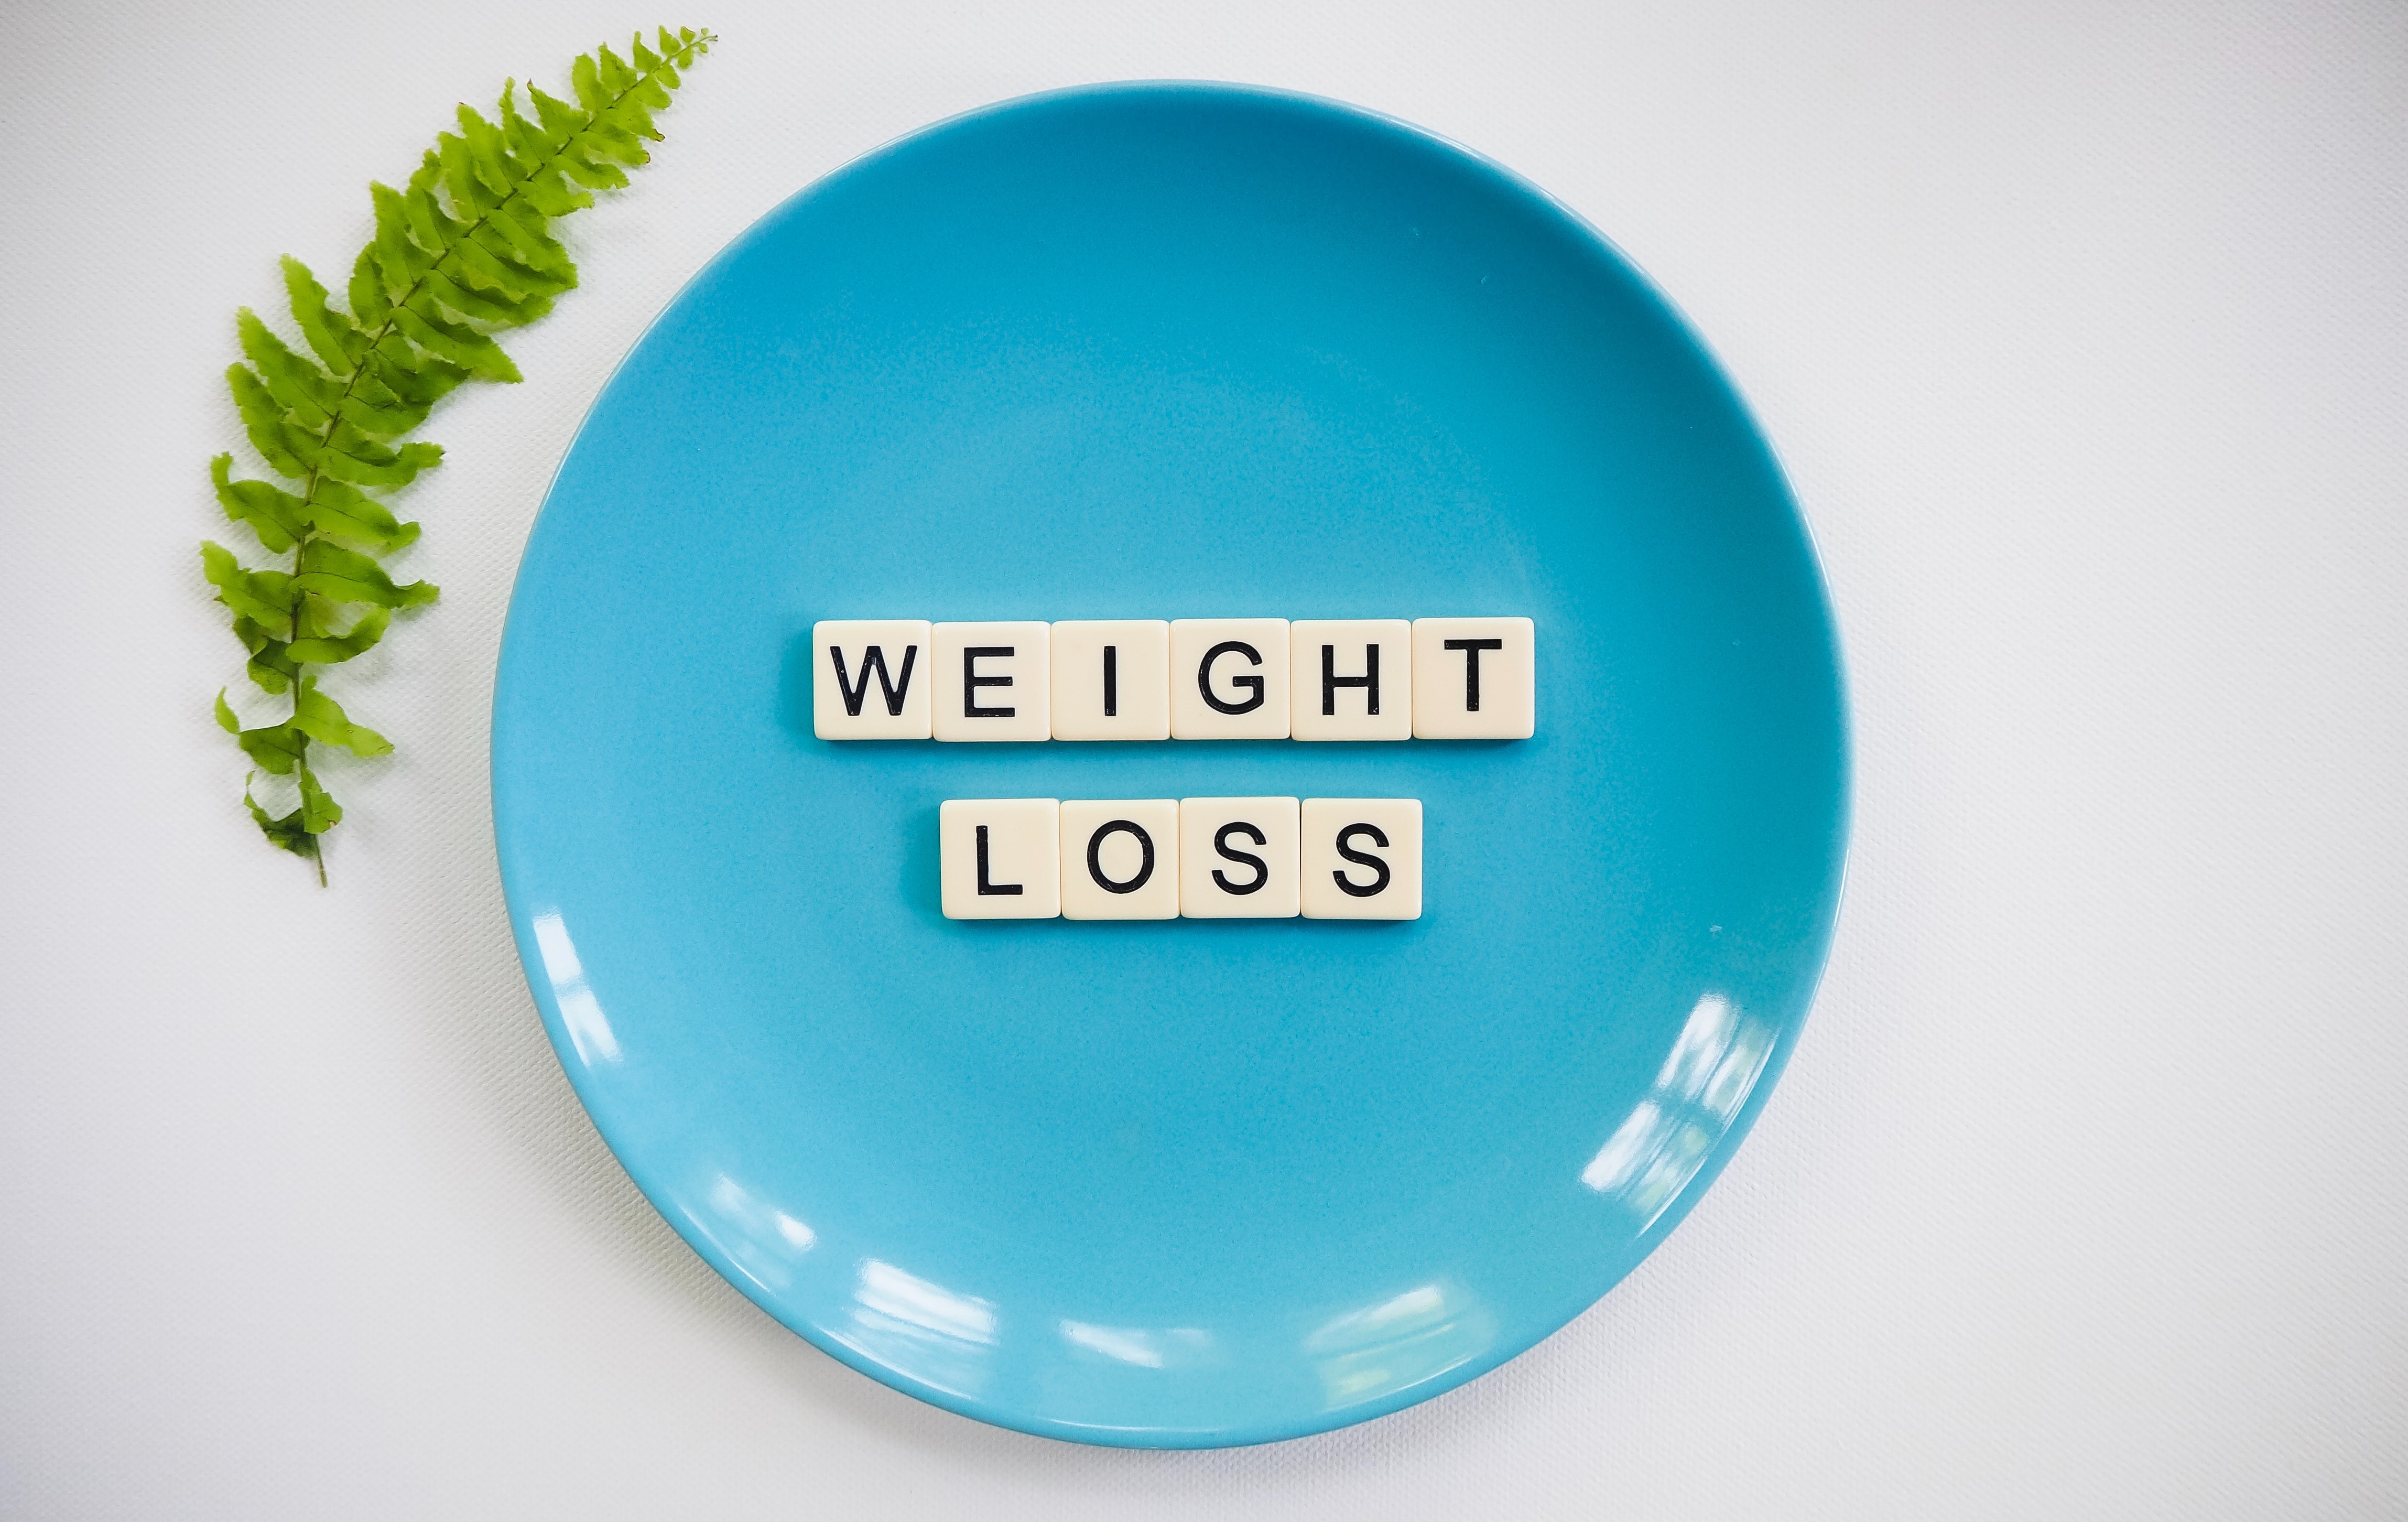 The words lose weight written on a blue plate on a table.